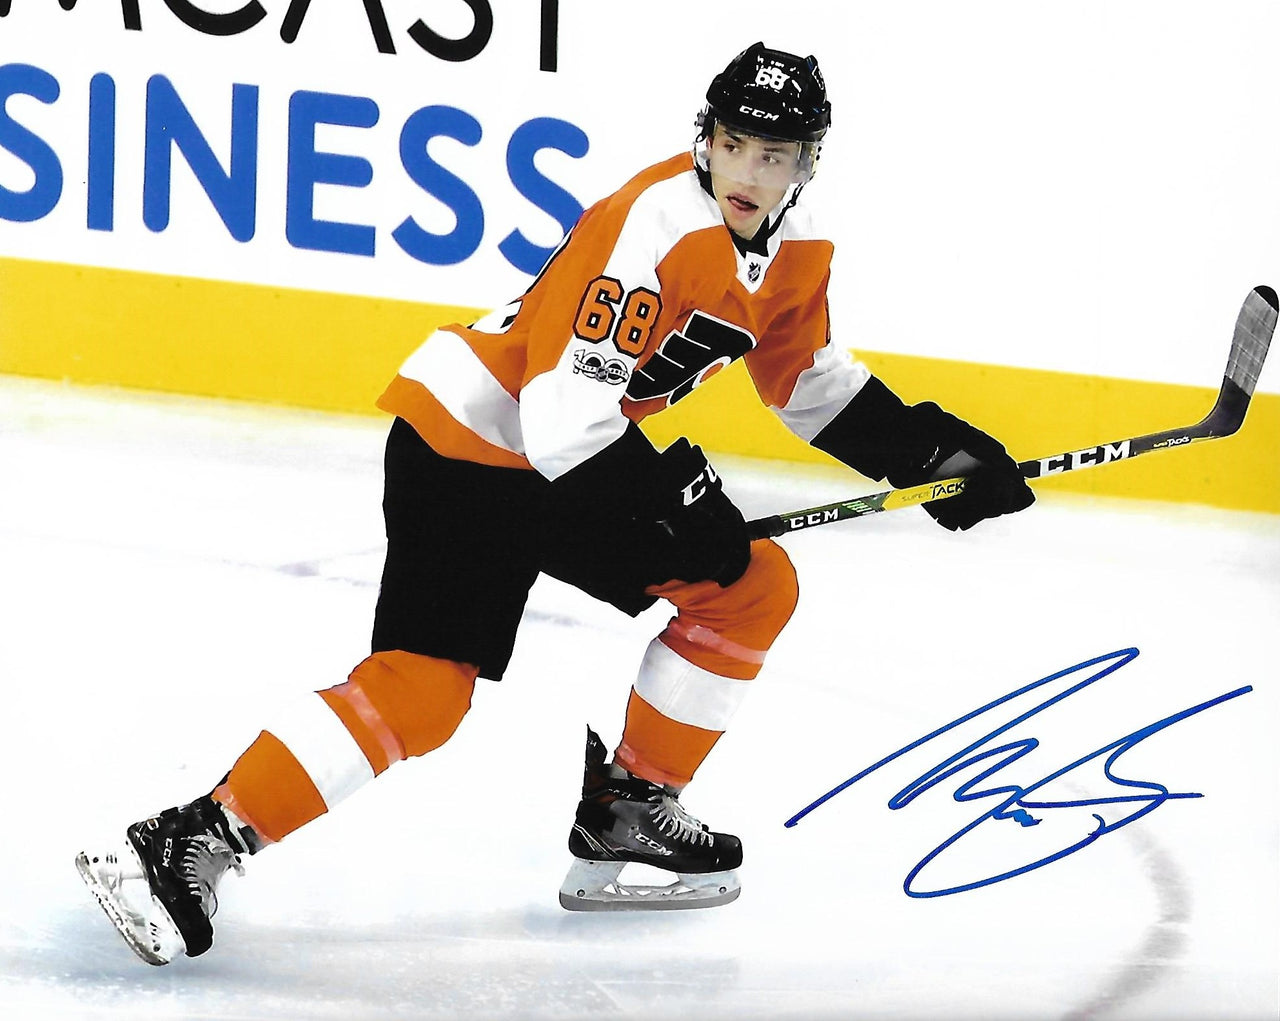 Morgan Frost in Action Autographed Philadelphia Flyers Hockey Photo - Dynasty Sports & Framing 